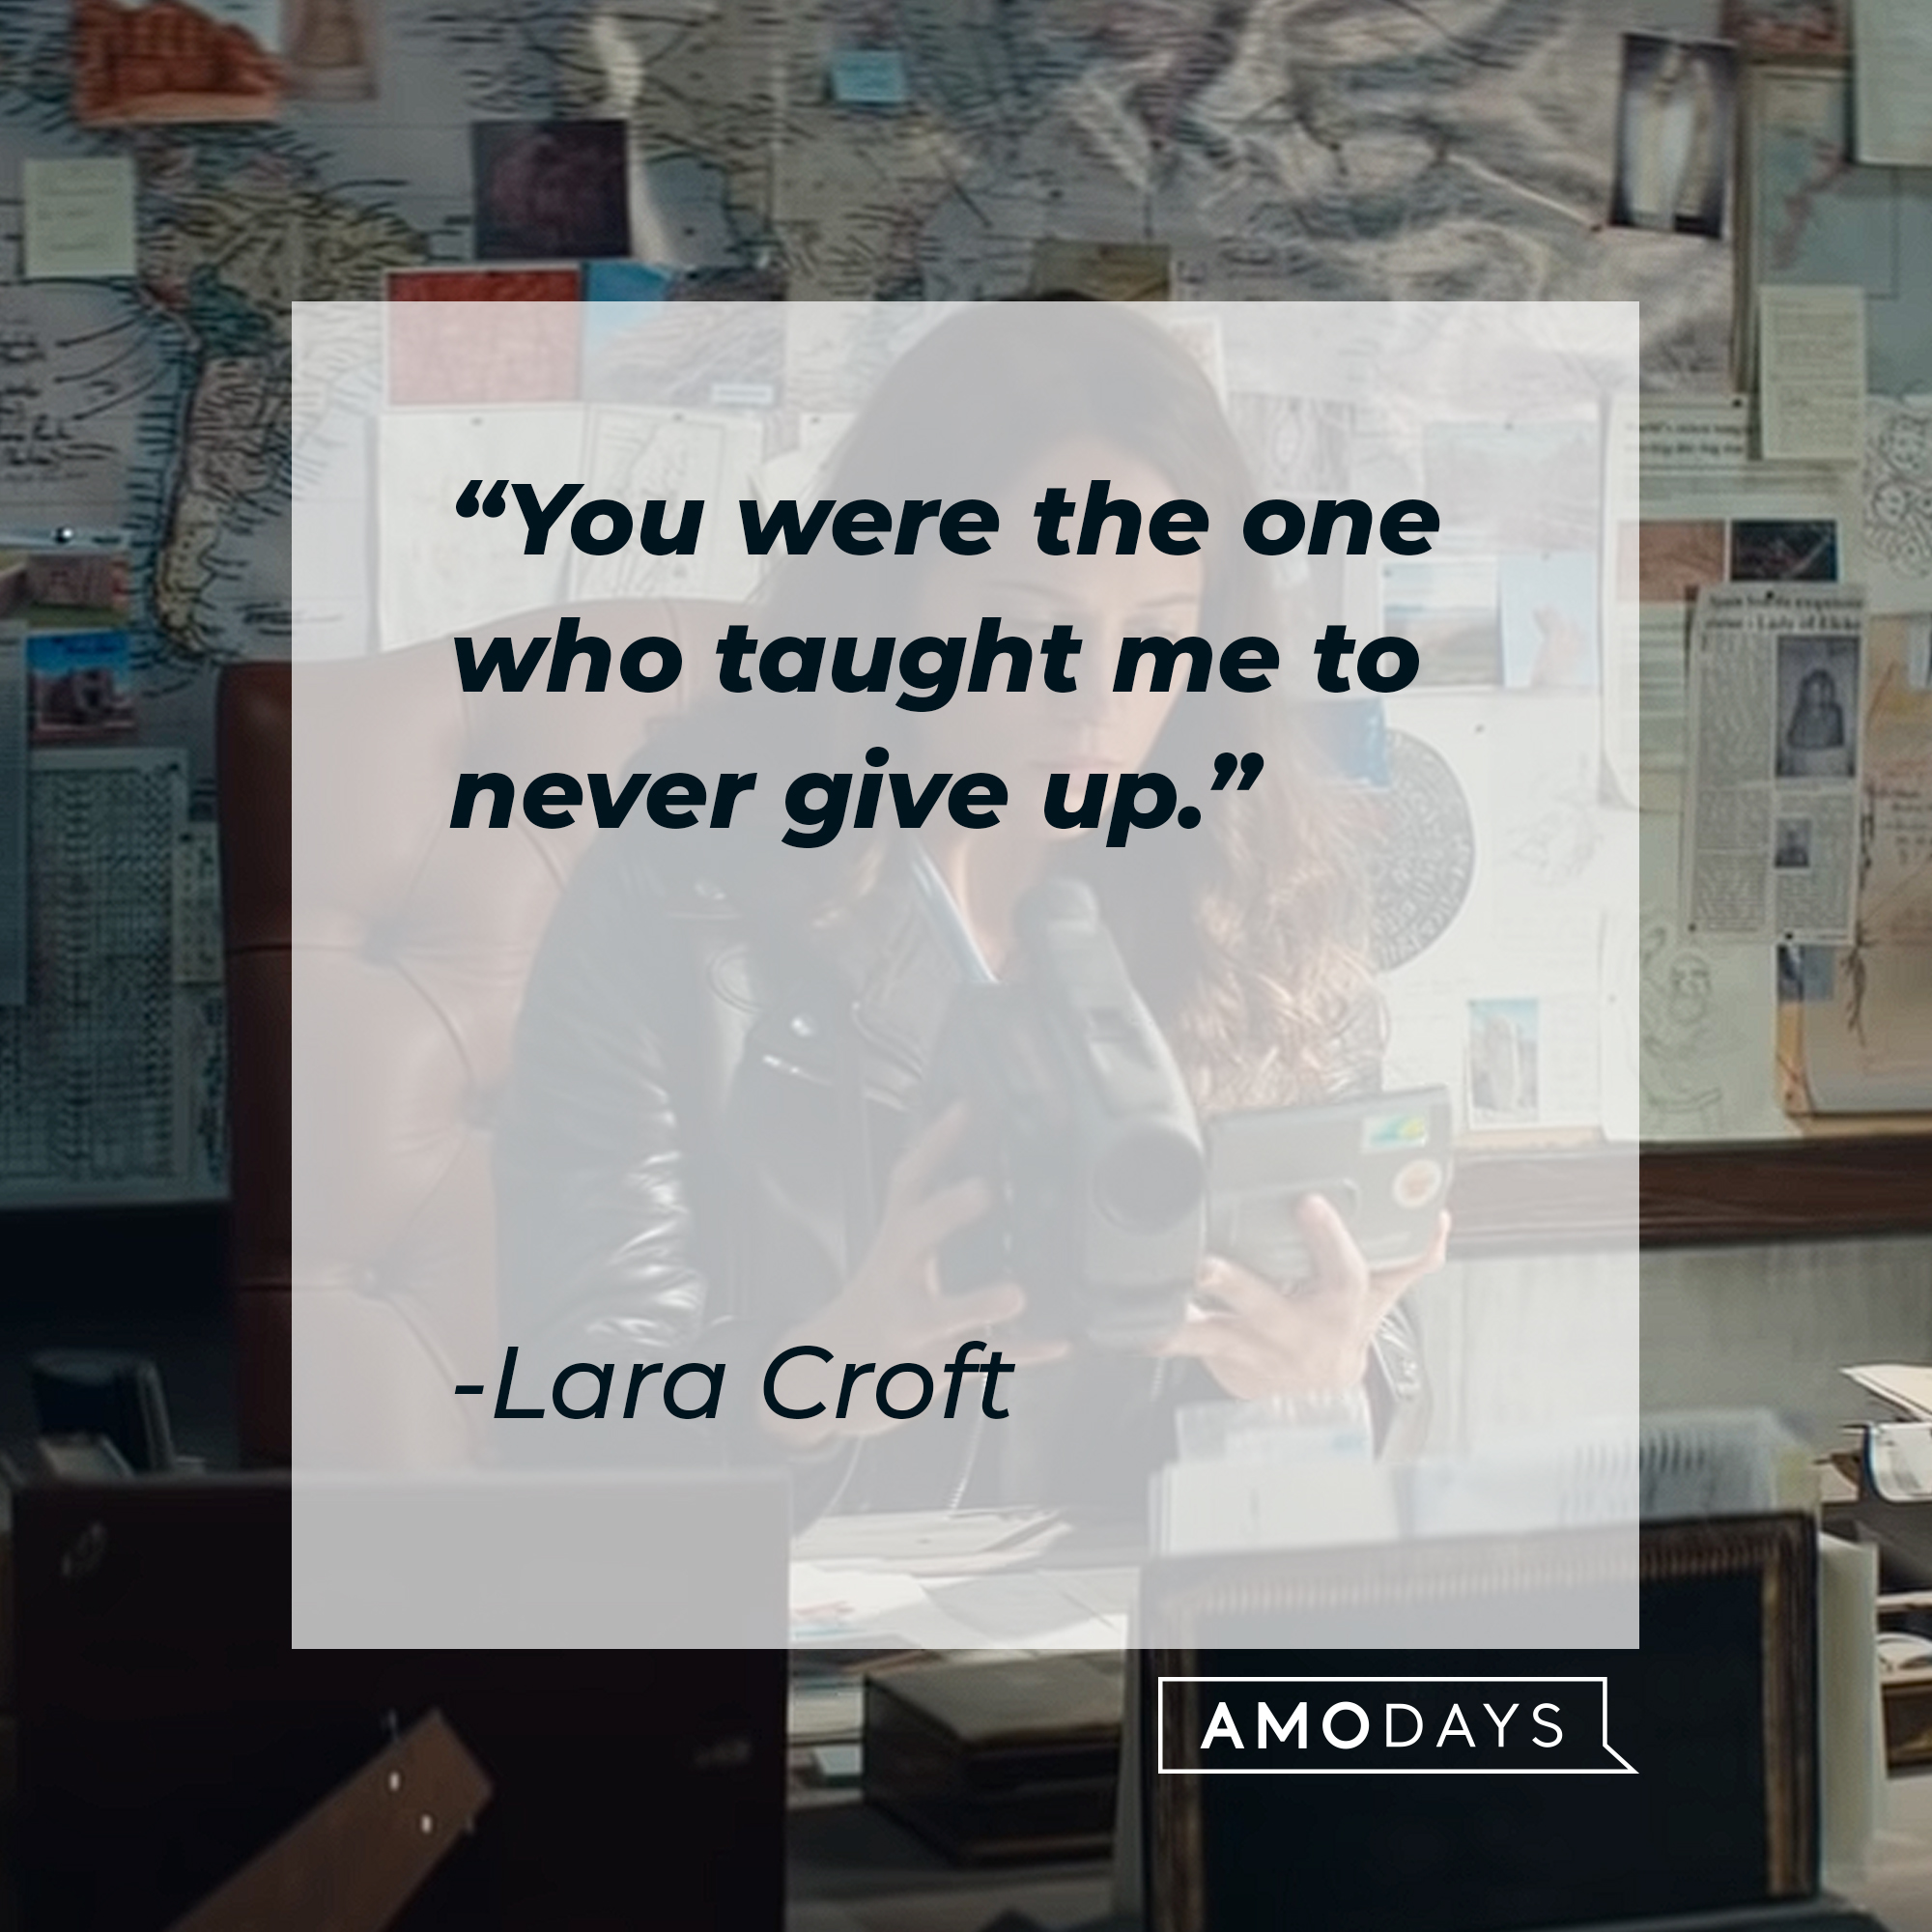 An image of Alicia Vikander’s Lara Croft with her quote: “You were the one who taught me to never give up.” | Source: youtube.com/WarnerBrosPictures